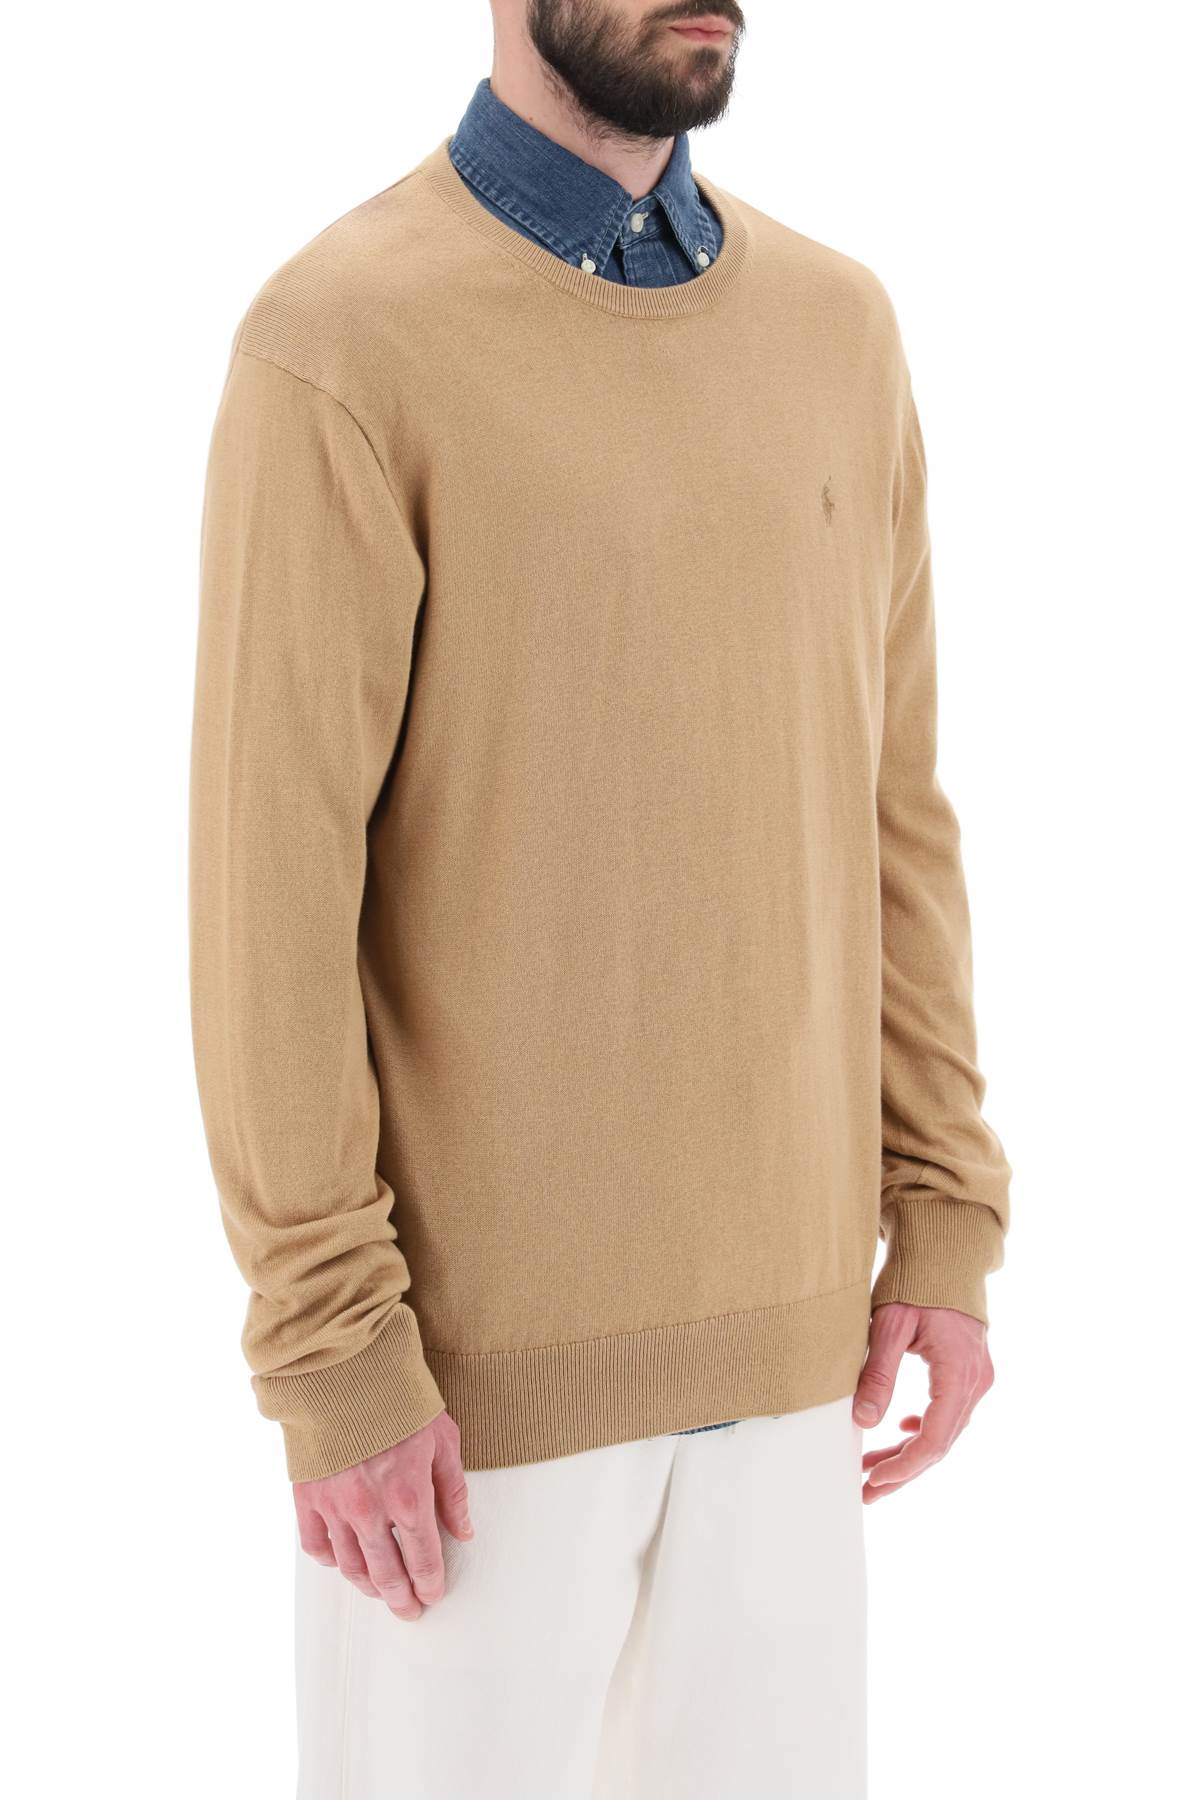 Shop Polo Ralph Lauren Sweater In Cotton And Cashmere In Burlap Tan (beige)